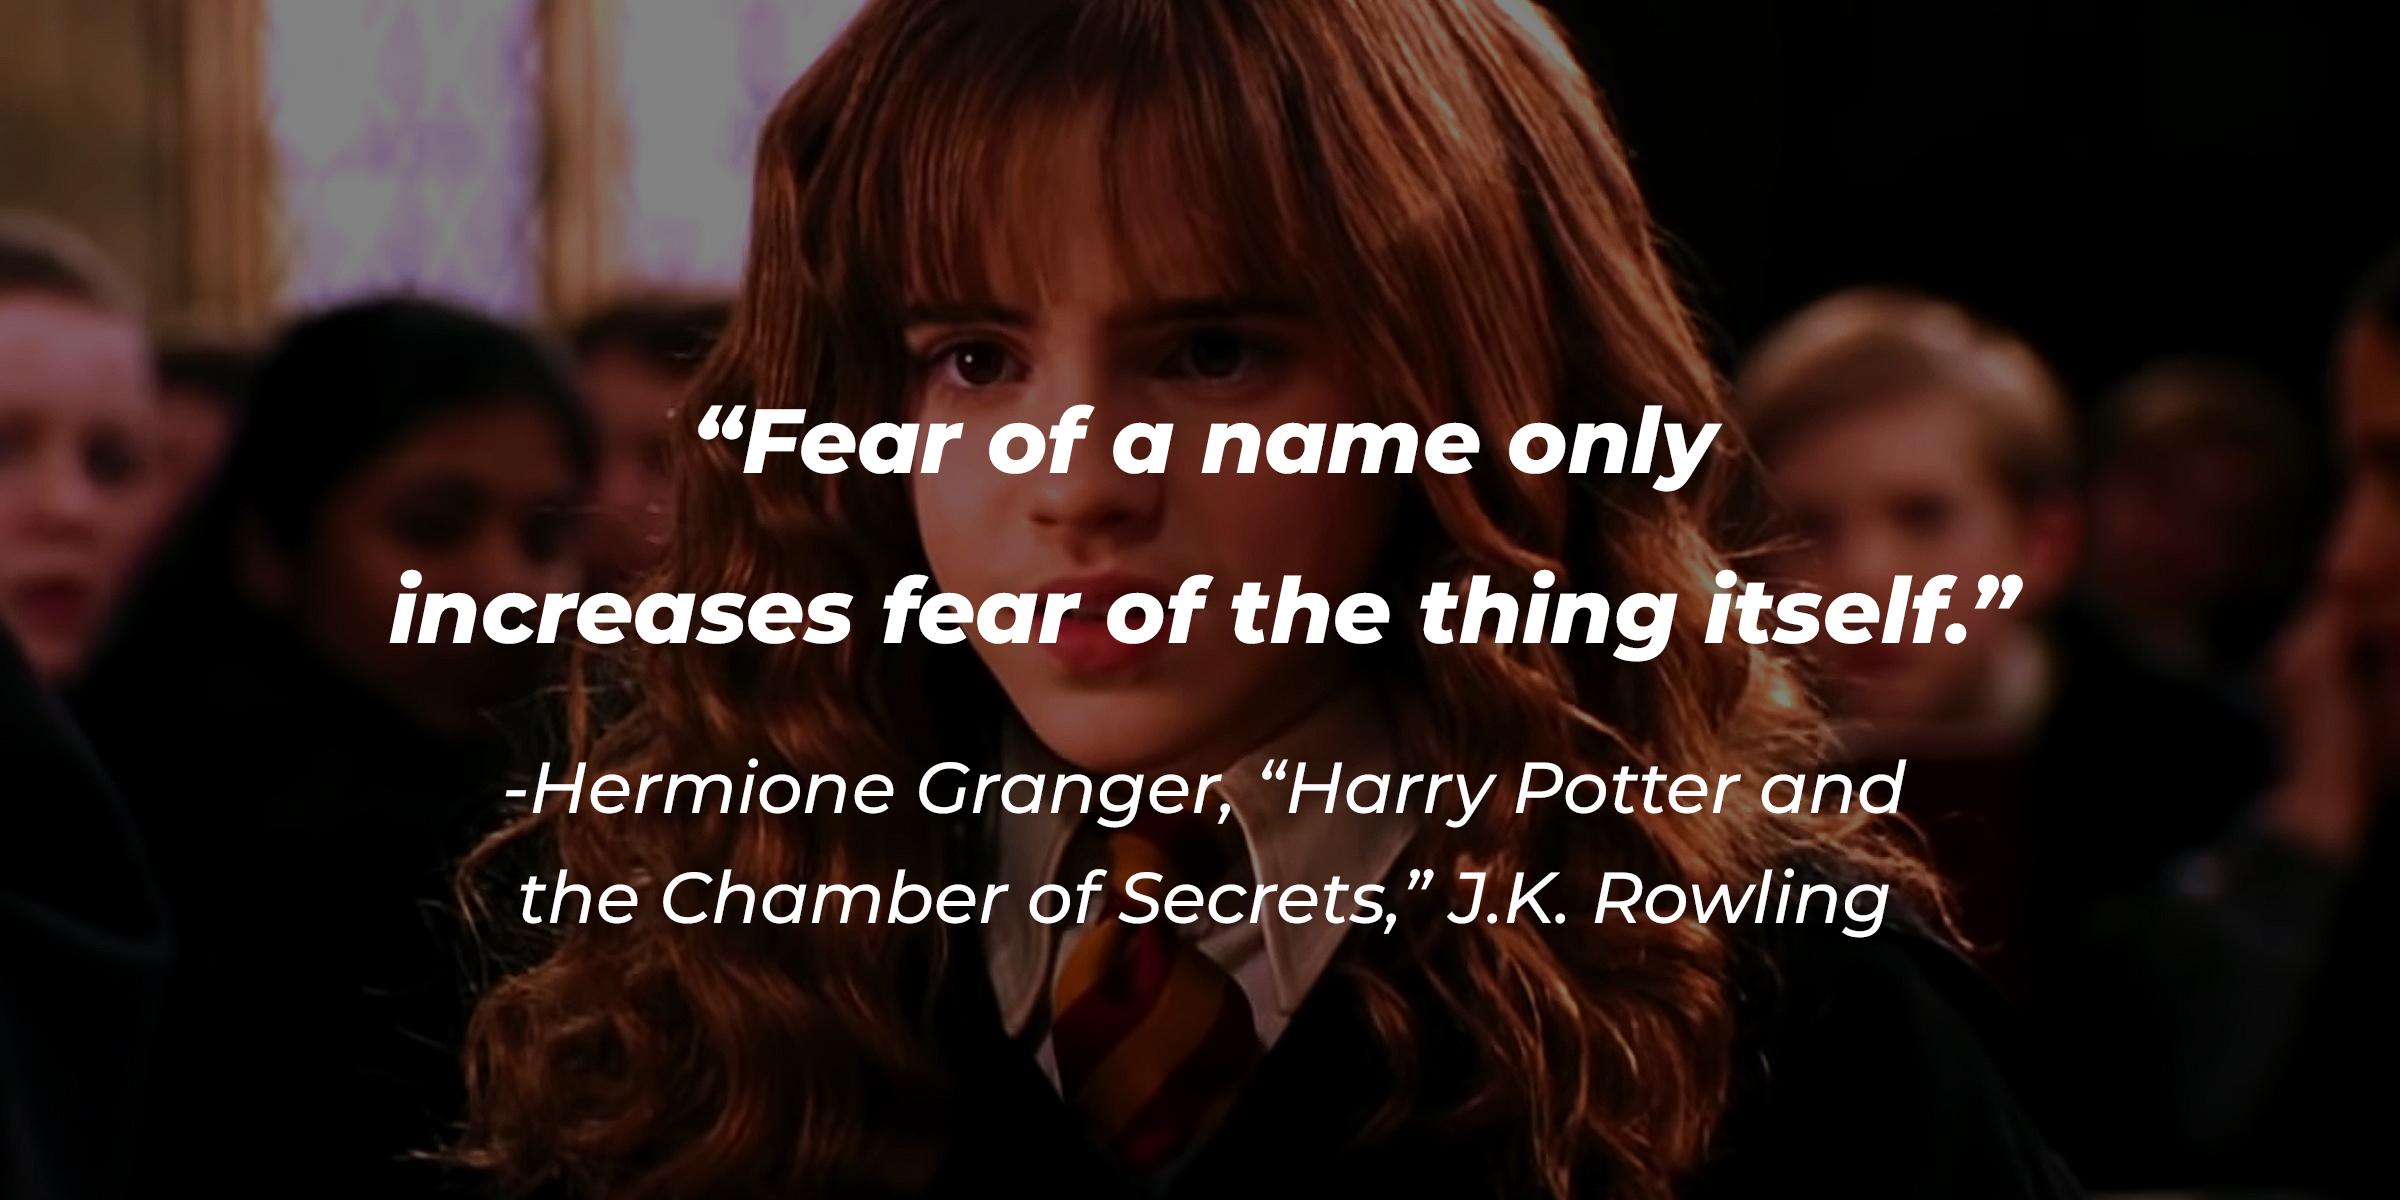 An image of Hermione Granger, with her quote: "Fear of a name only increases fear of the thing itself." | Source: Youtube.com/harrypotter